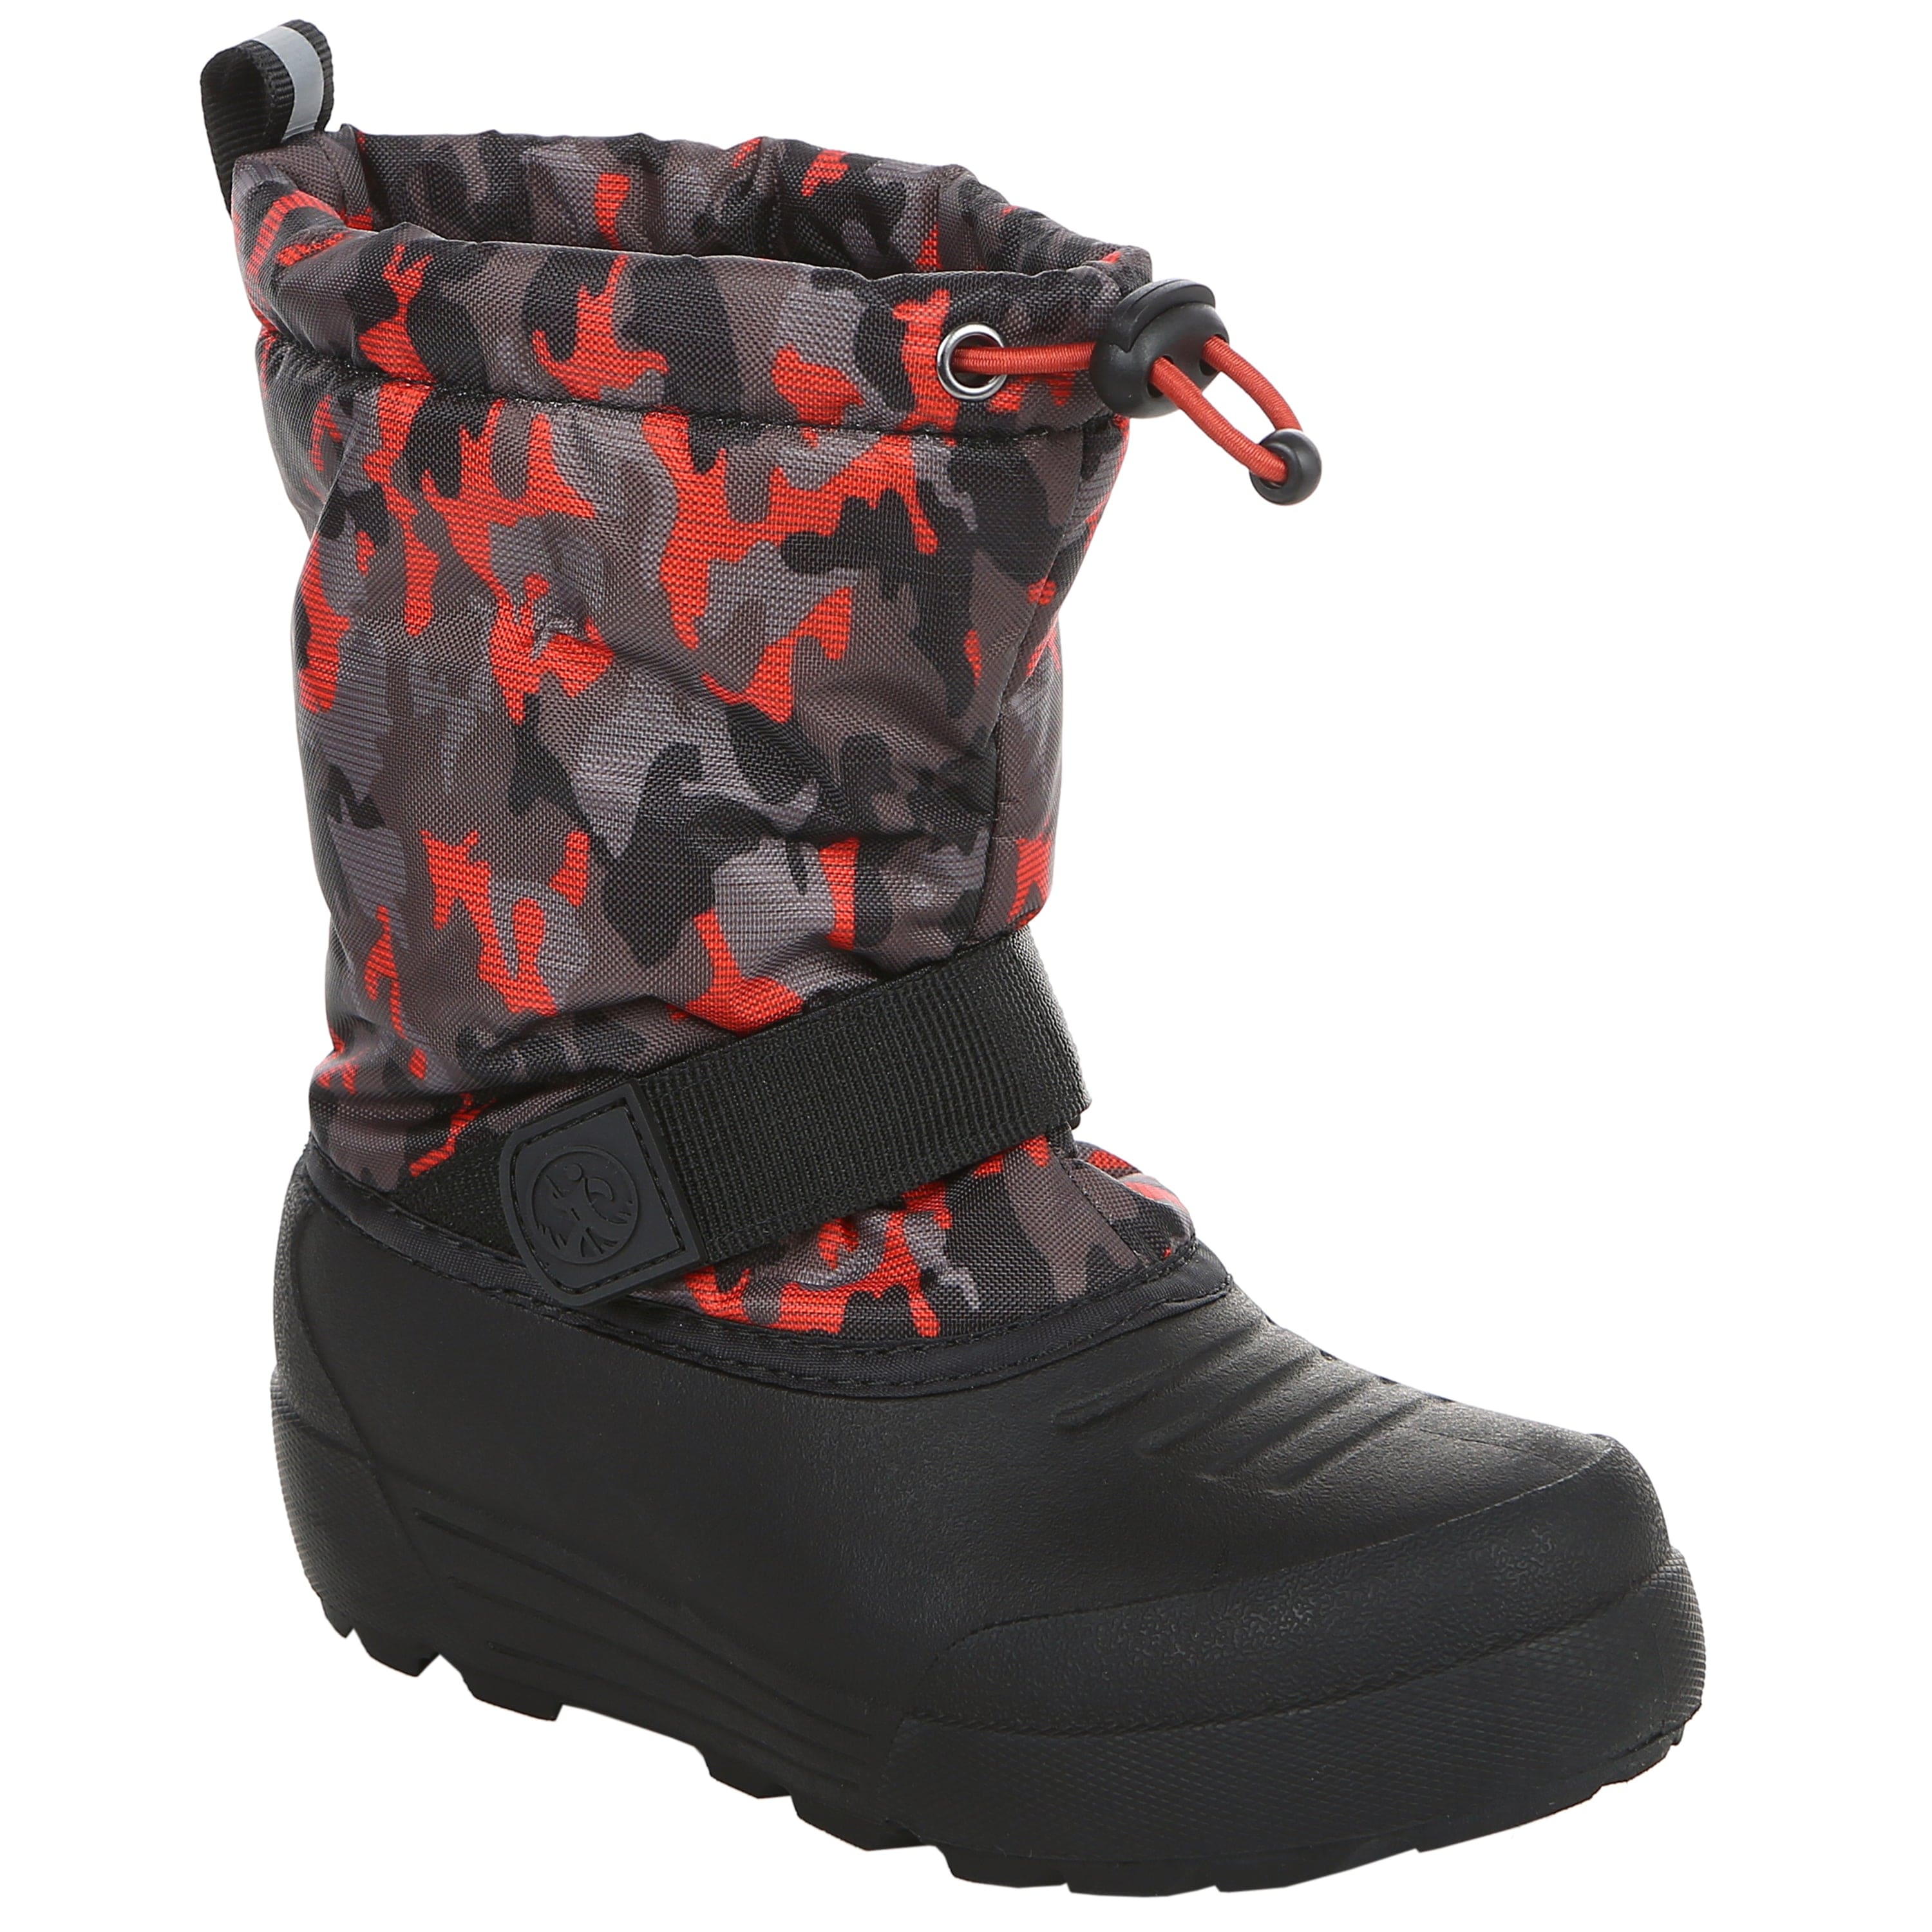 Kids' Girls' Ava Cold Weather Snow Boot